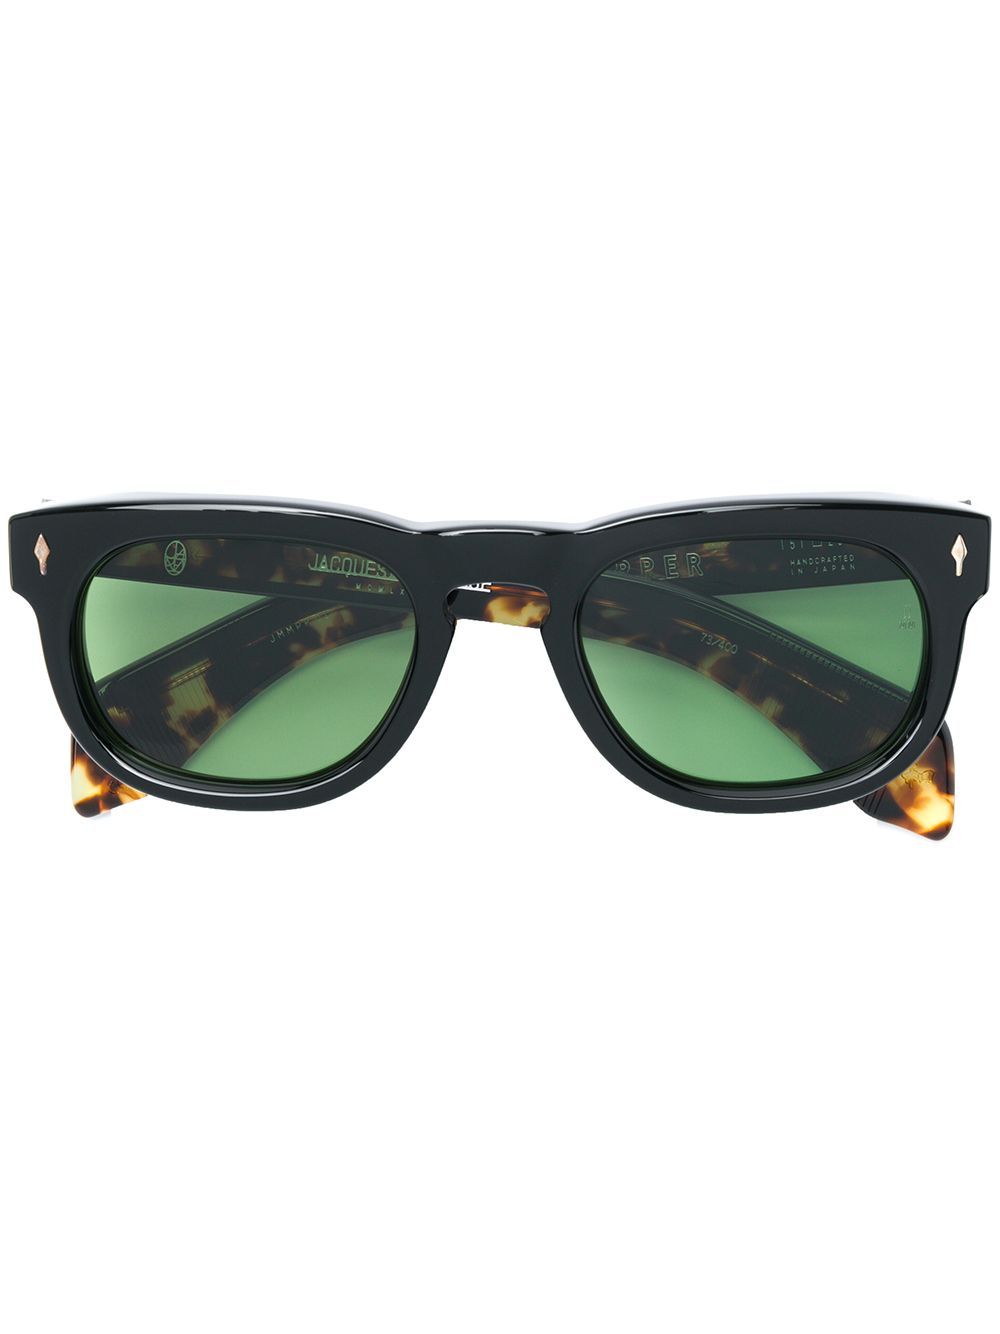 Jacques Marie Mage The Pepper sunglasses - Black | FarFetch Global